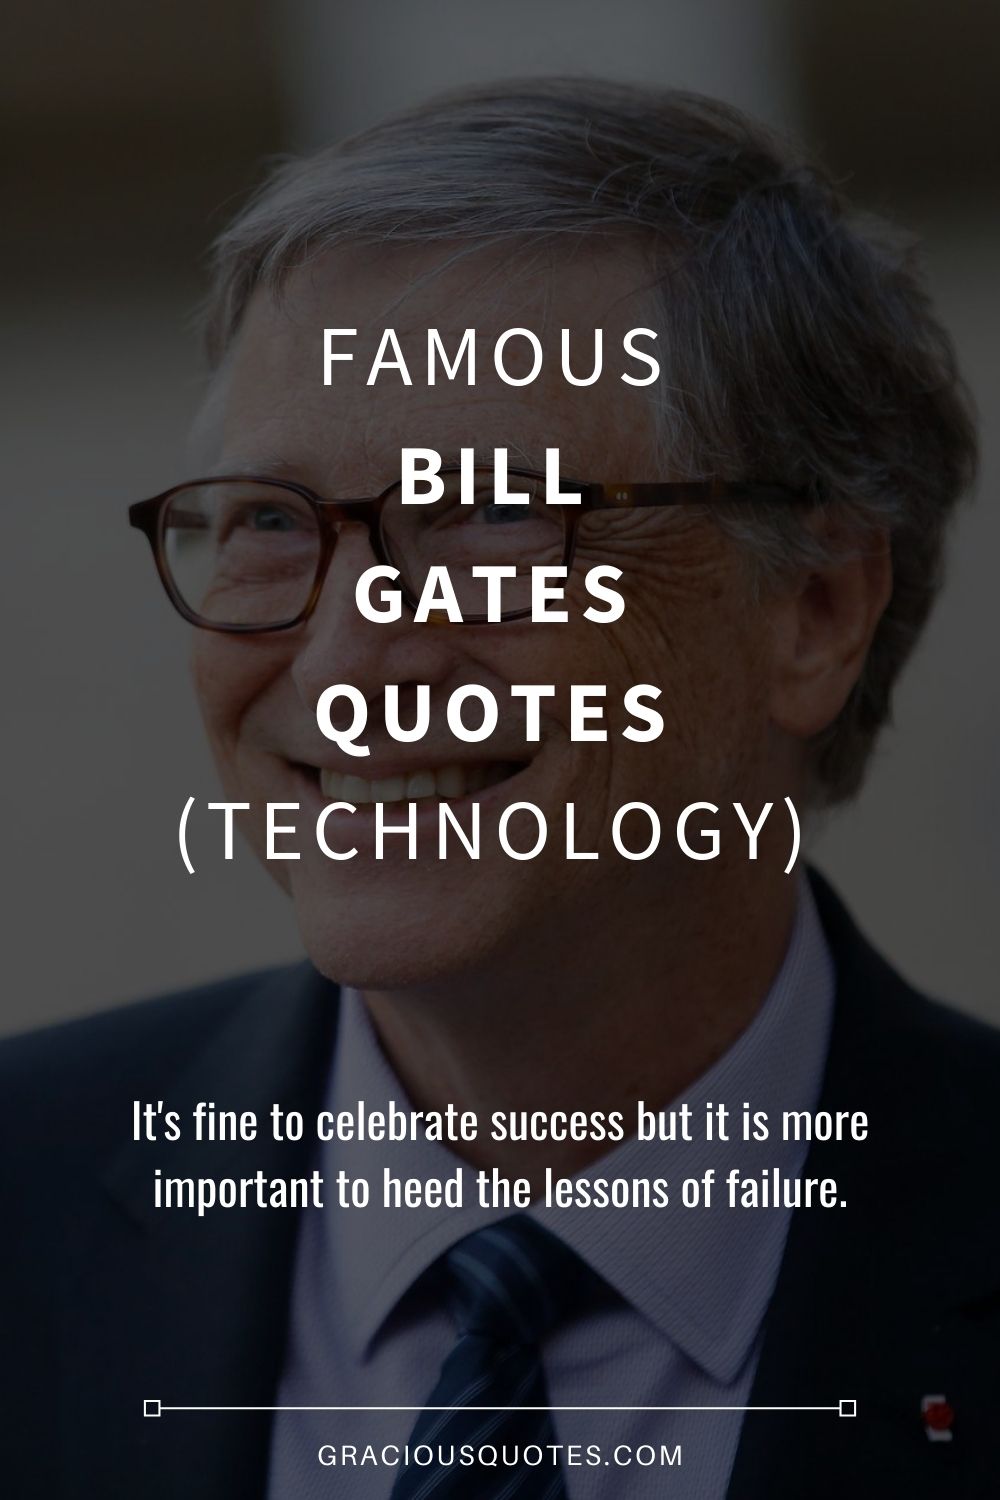 Famous Bill Gates Quotes (TECHNOLOGY) - Gracious Quotes